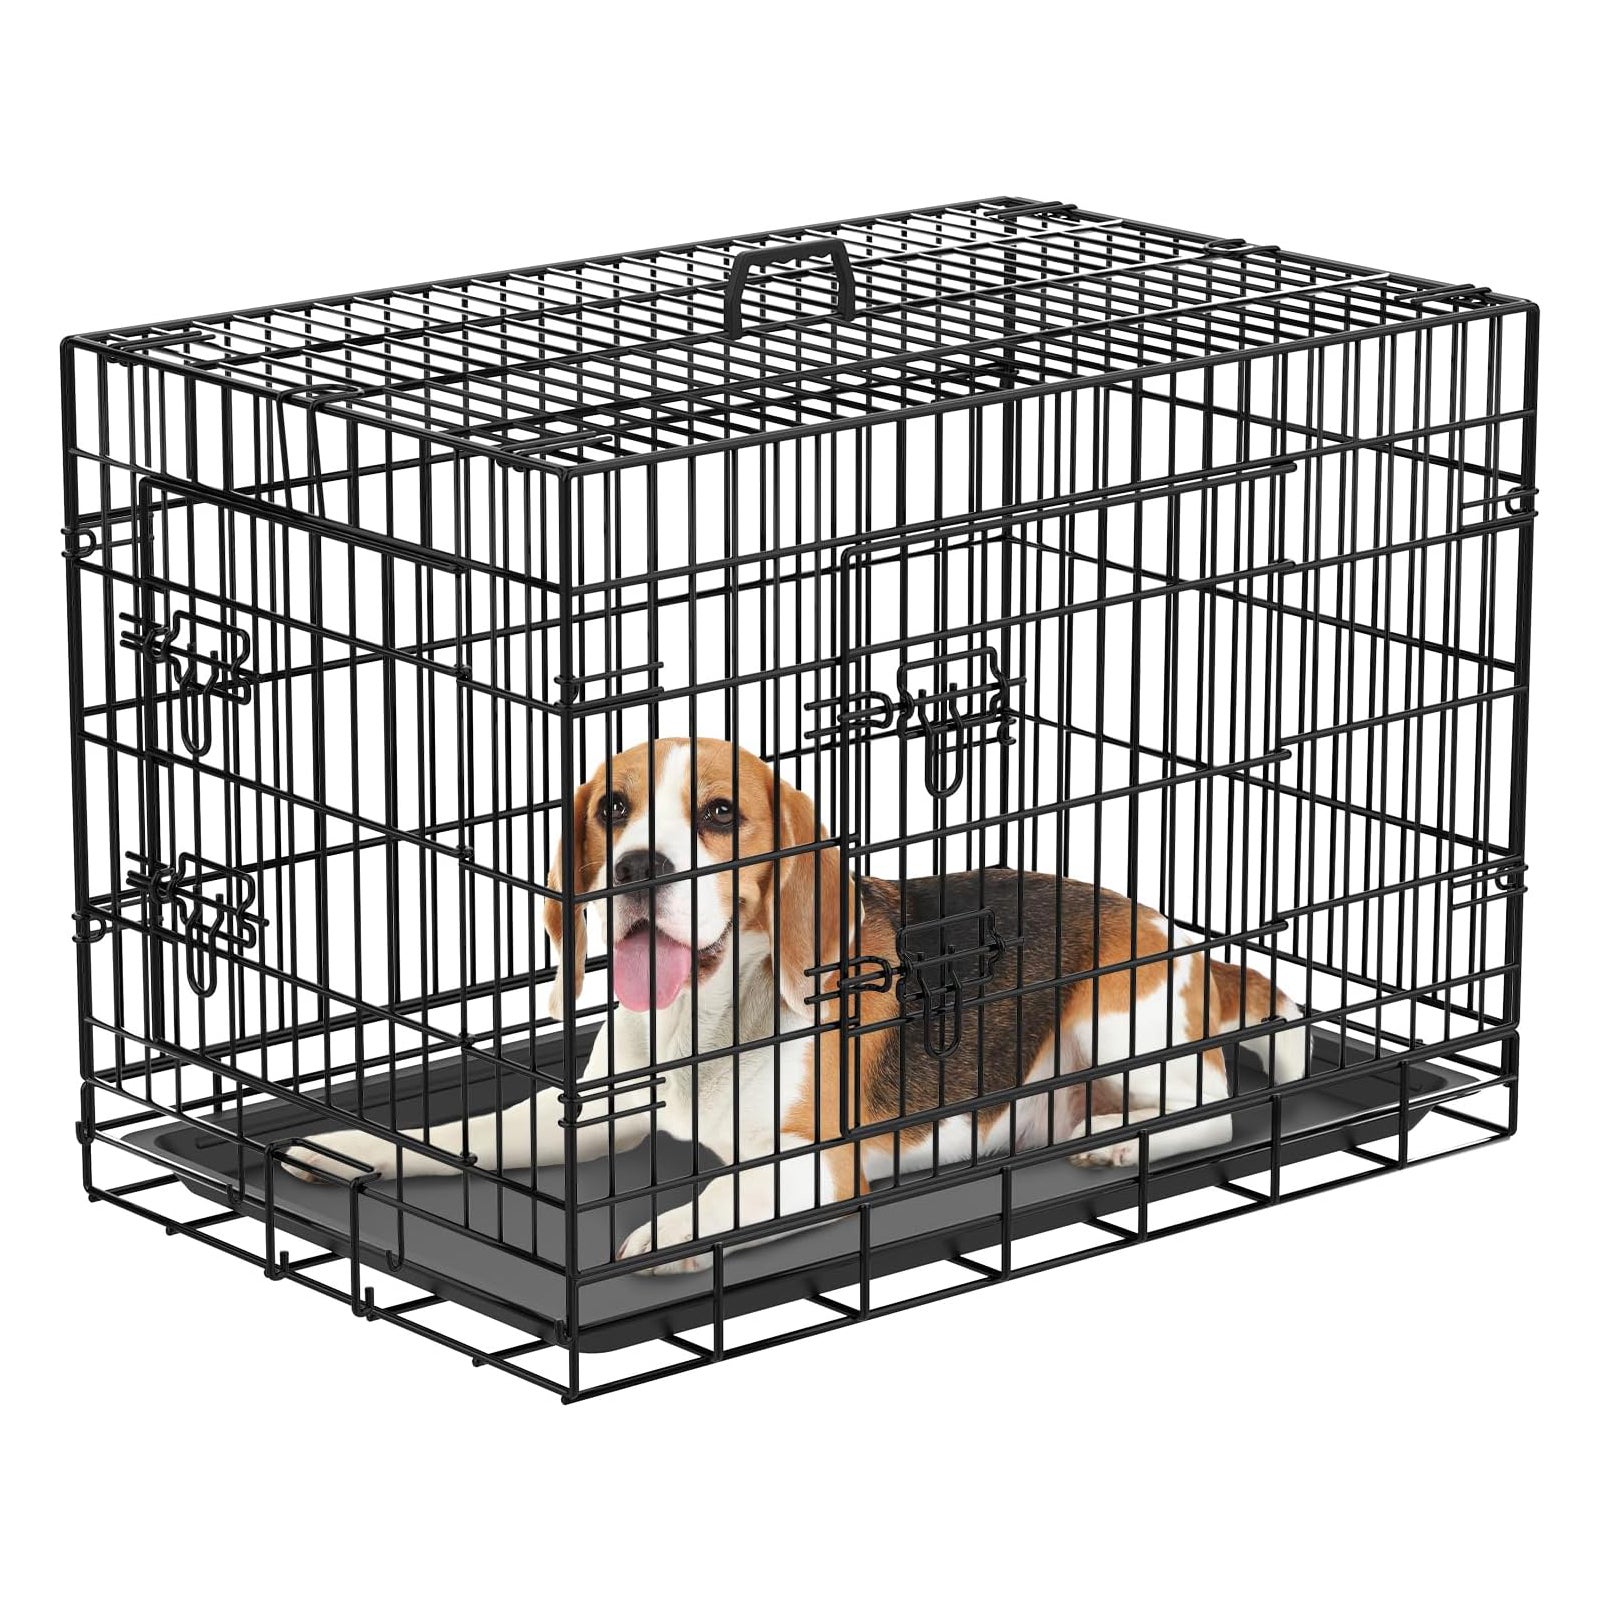 Advwin Dog Cage 24" Pet Crate Large Collapsible Kennel Puppy Cat Rabbit Metal Playpen 2 Doors (77.5x48.5x55.5cm)